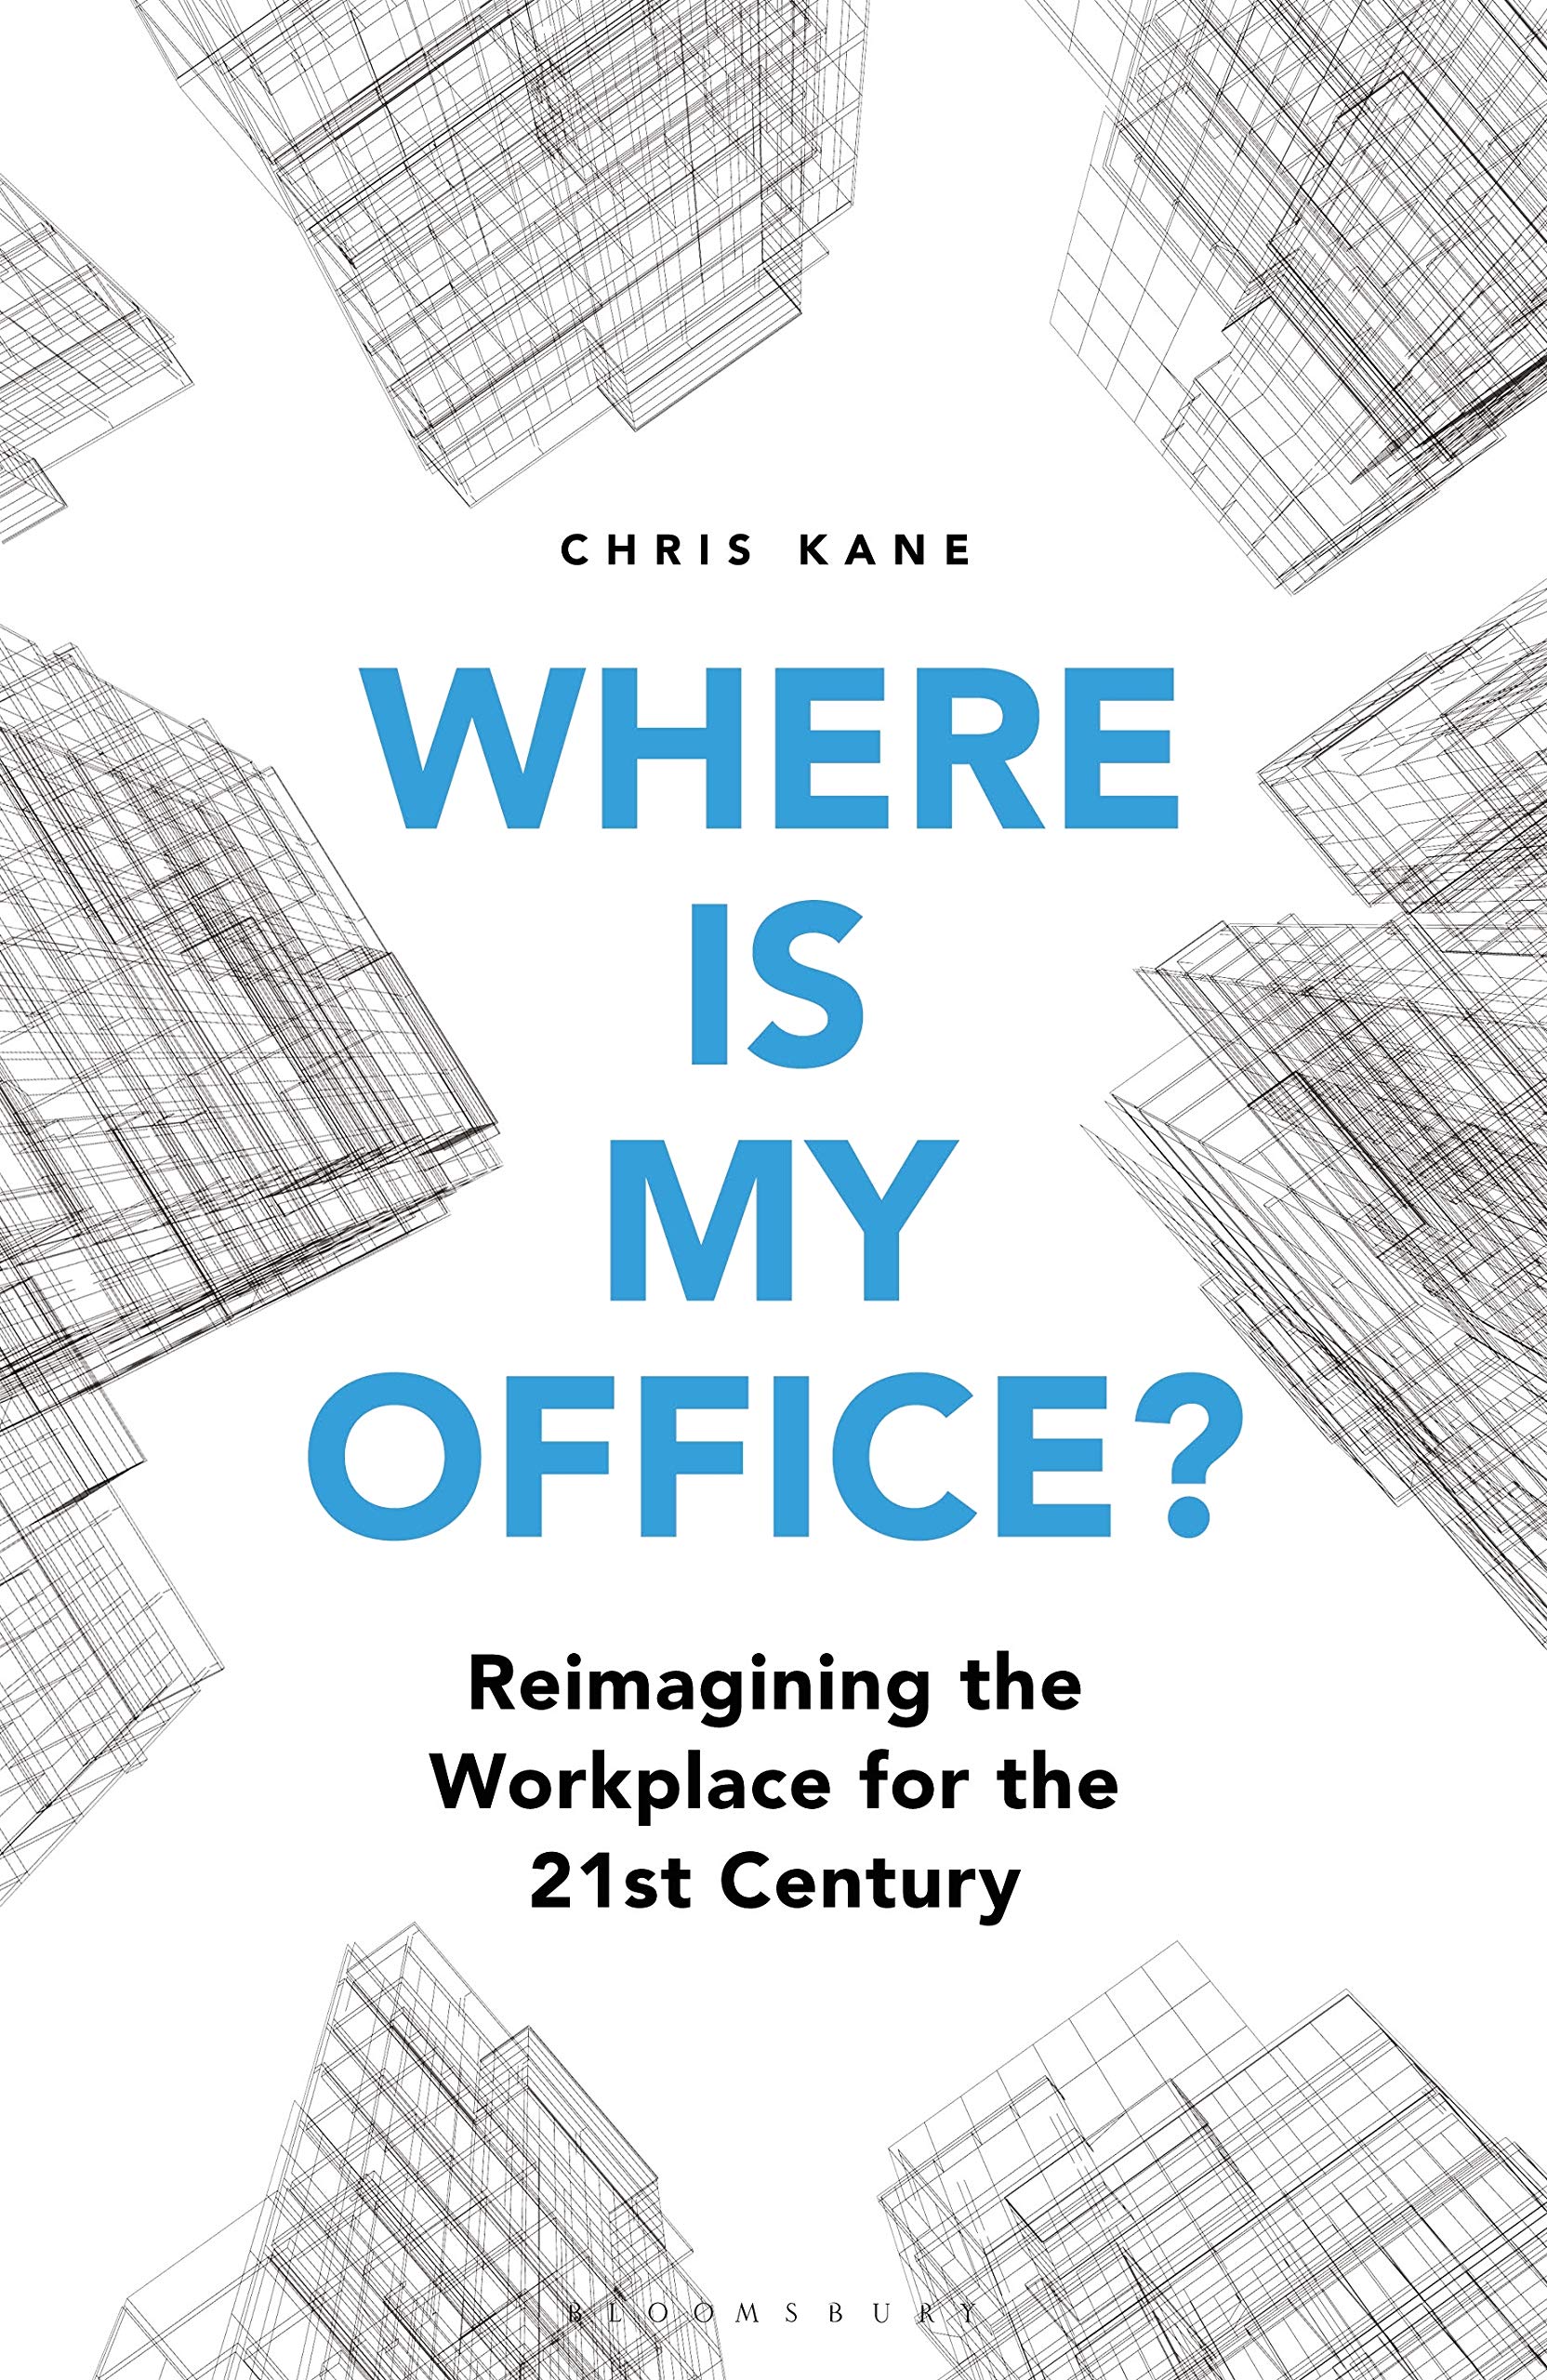 Where is my office